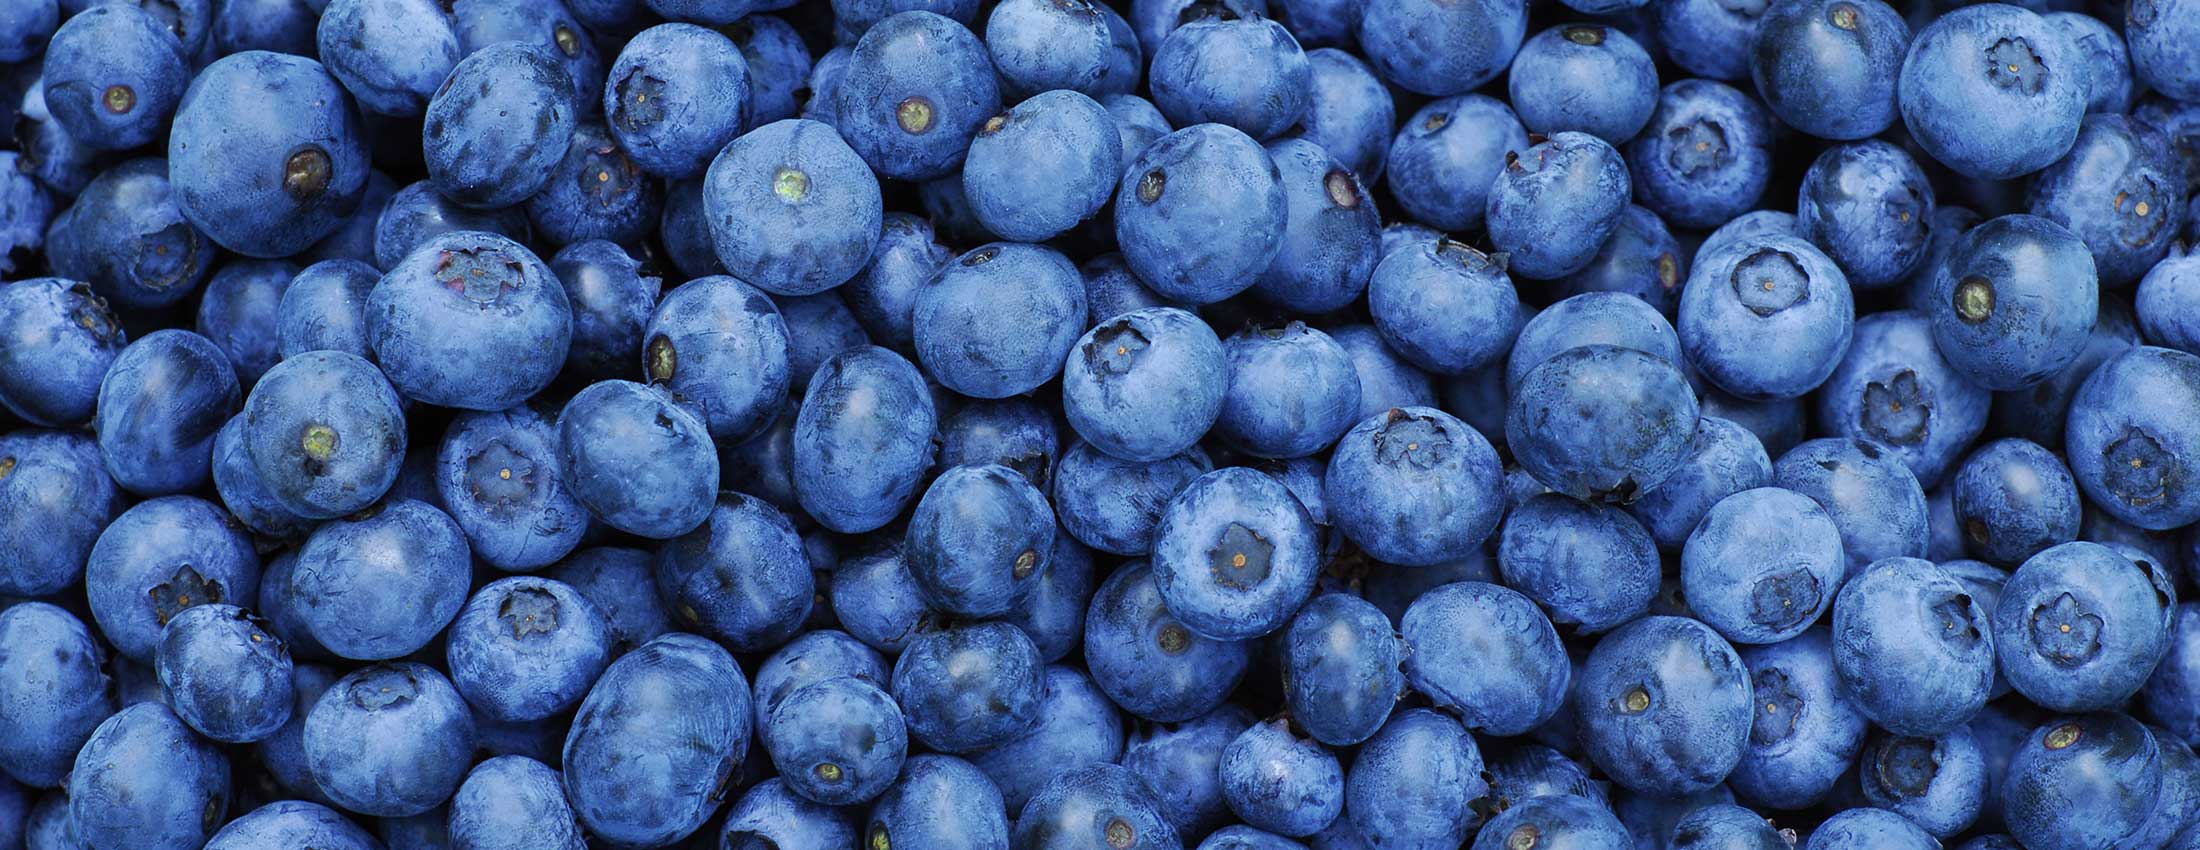 Biological Blueberries are World Beaters